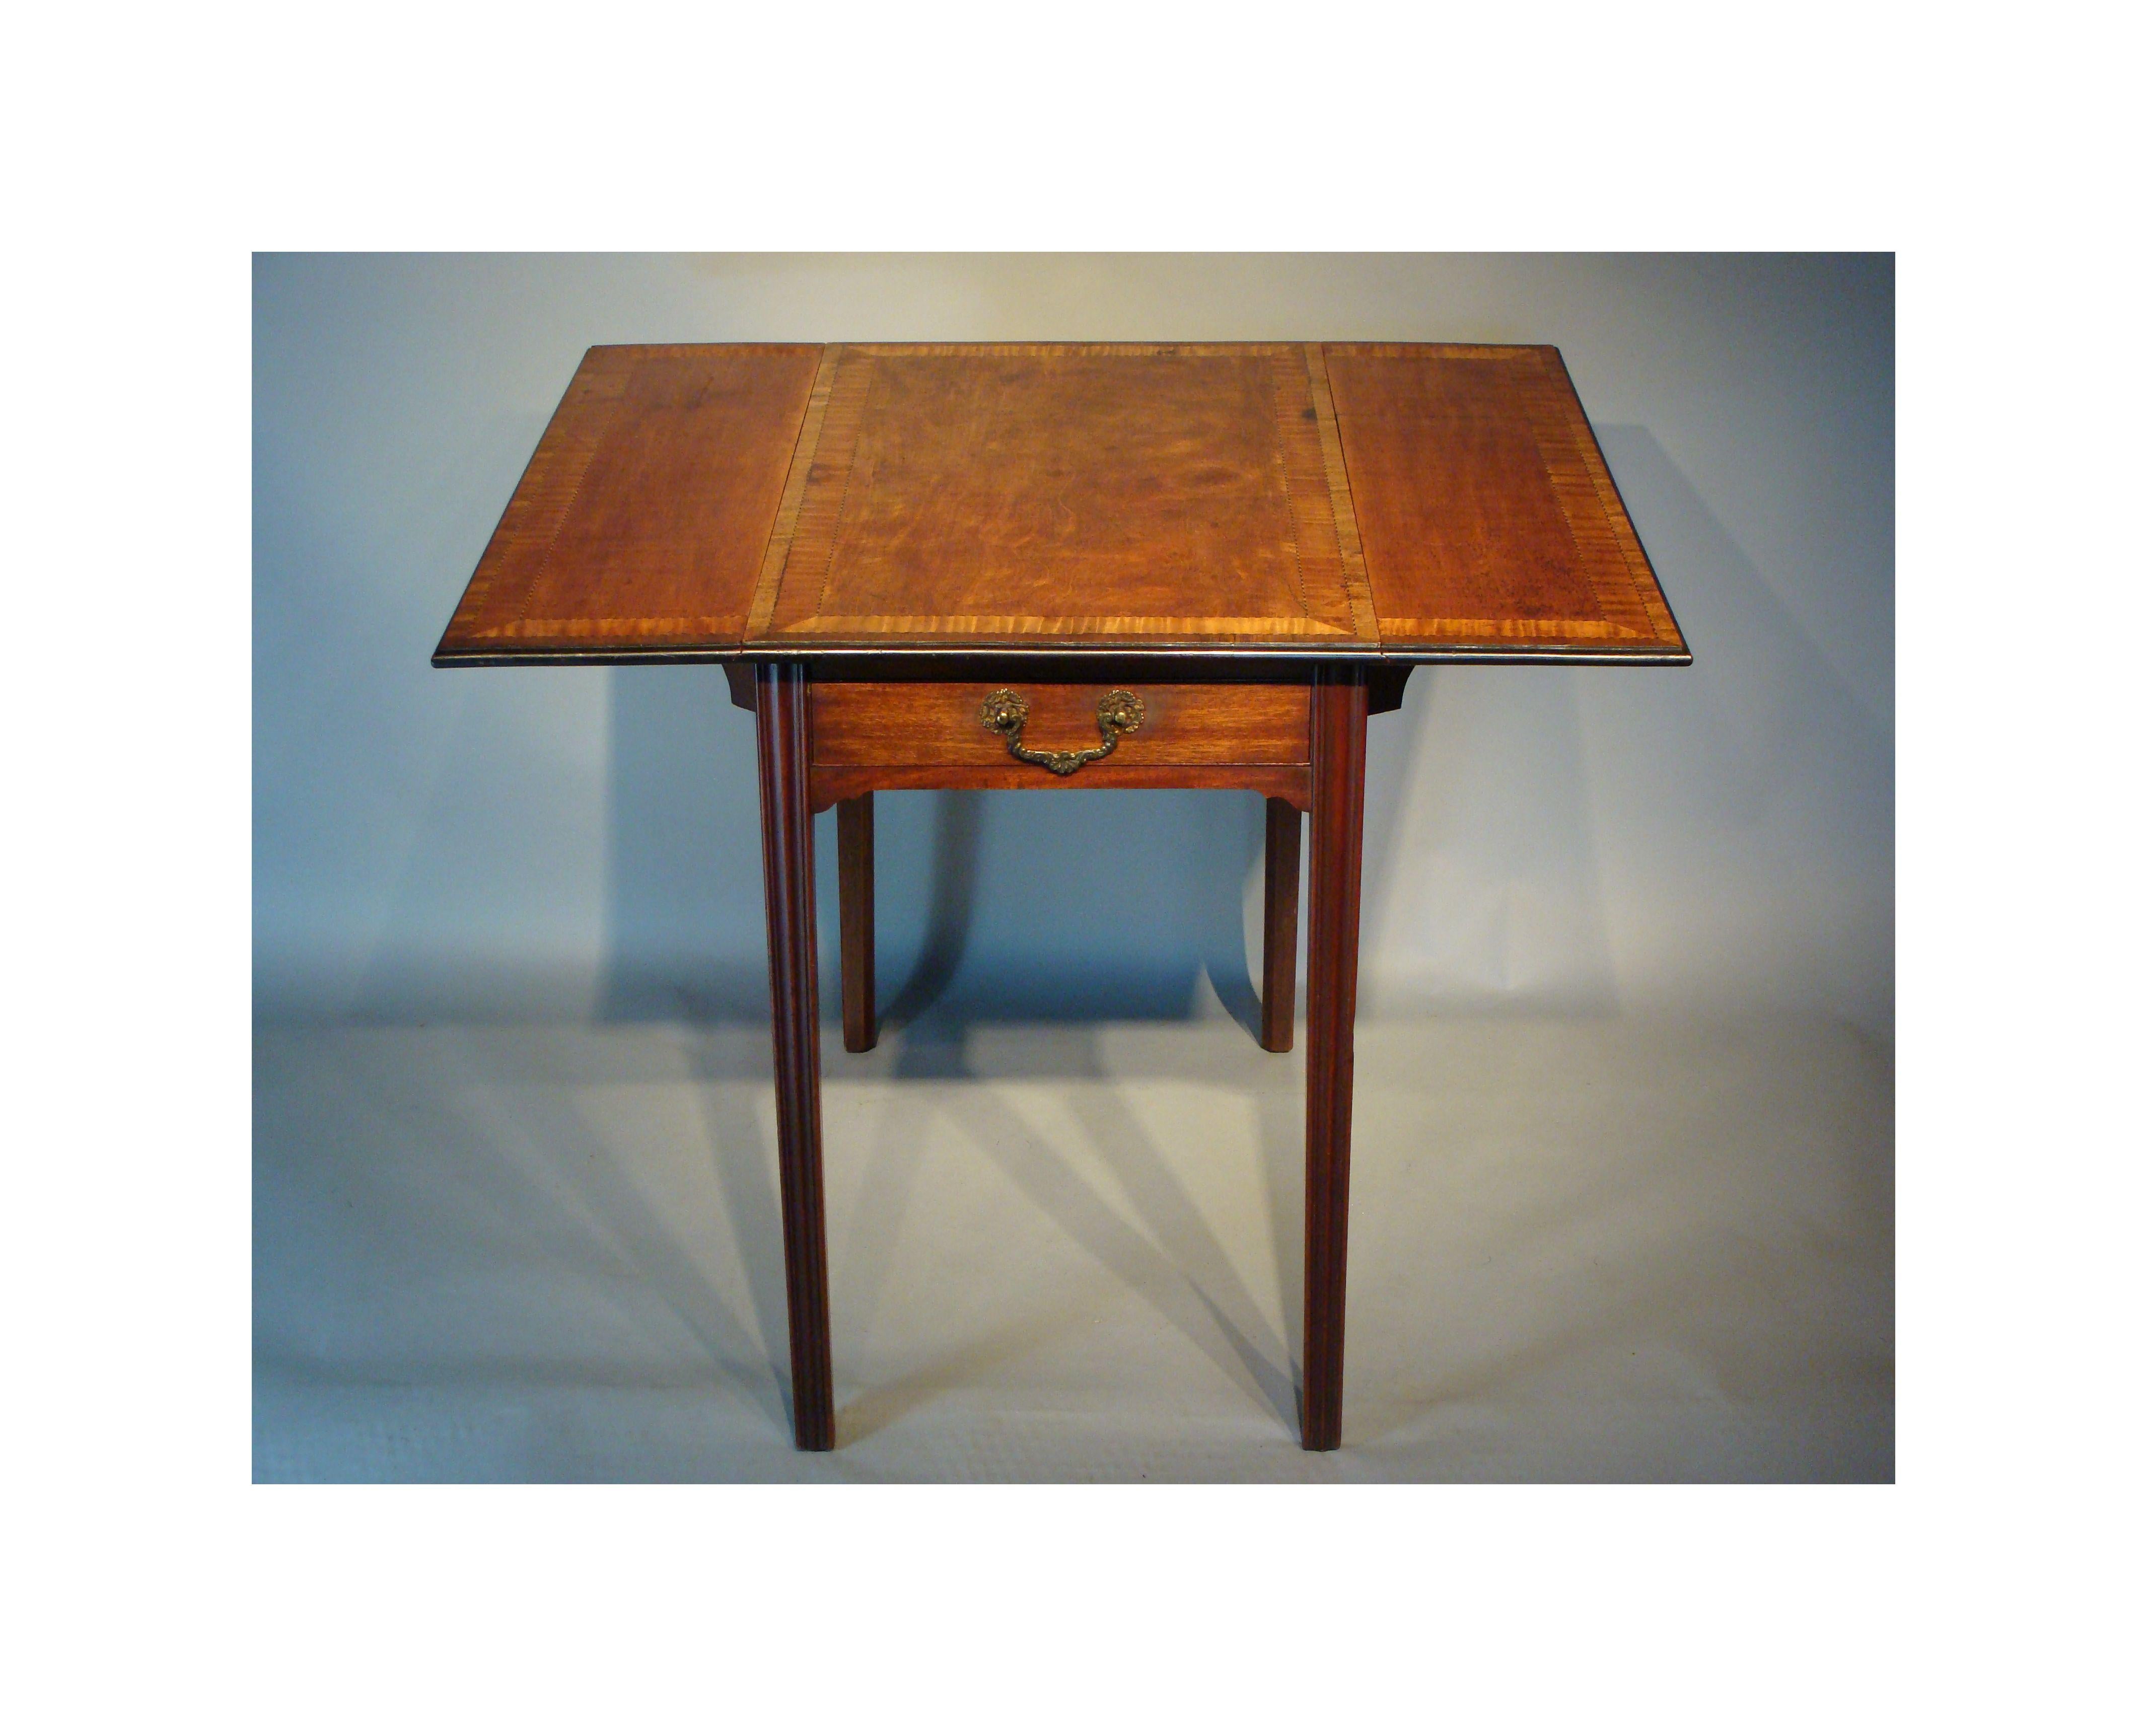 A late 18th century satinwood Pembroke table of very good rich color. 
George III period.

The top crossbanded in satinwood, bordered with fine lozenges of ebony stringing.
The edges ebonized with narrow mahogany crossbandings.
Raised on